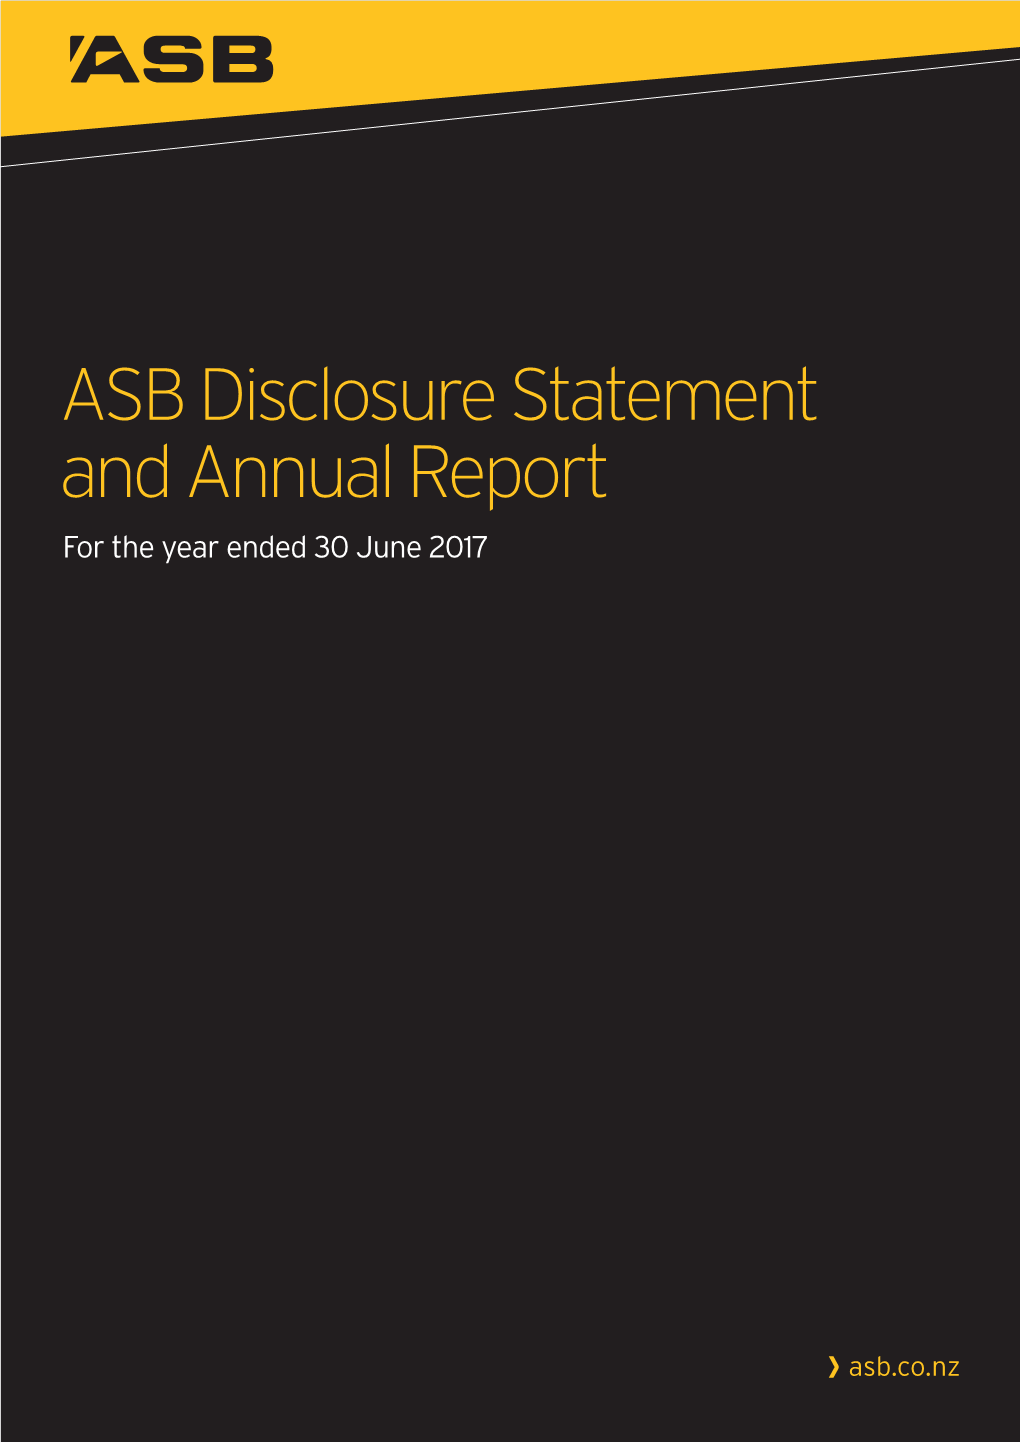 ASB Disclosure Statement for the Year Ended 30 June 2017